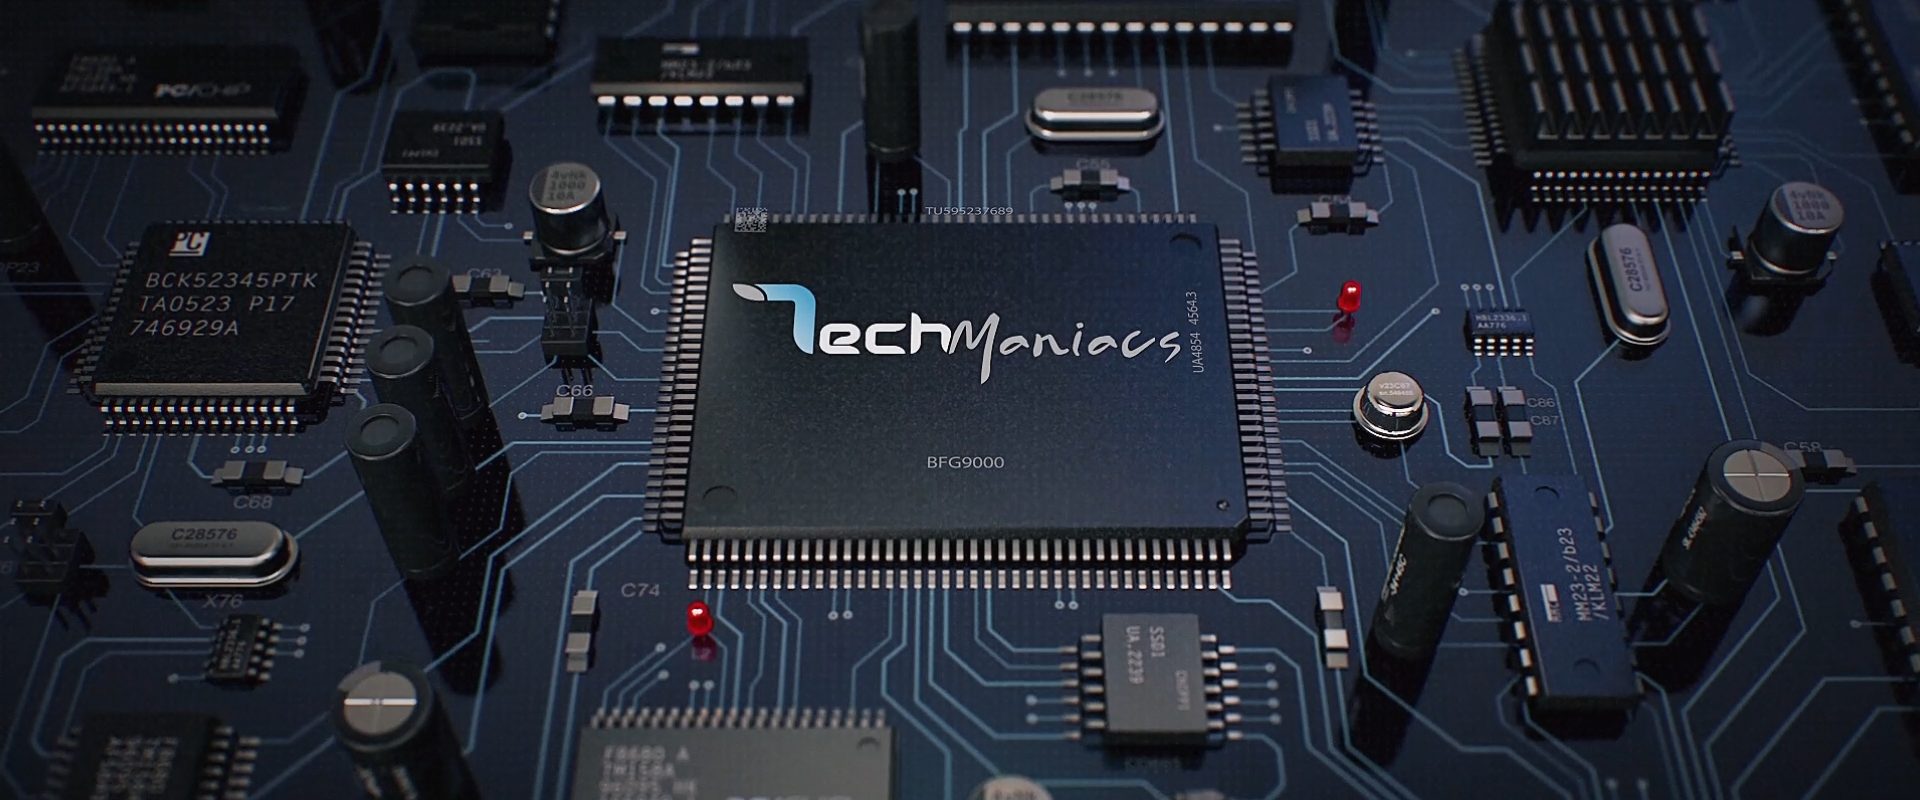 techmaniacs ident after effects cinema 4d